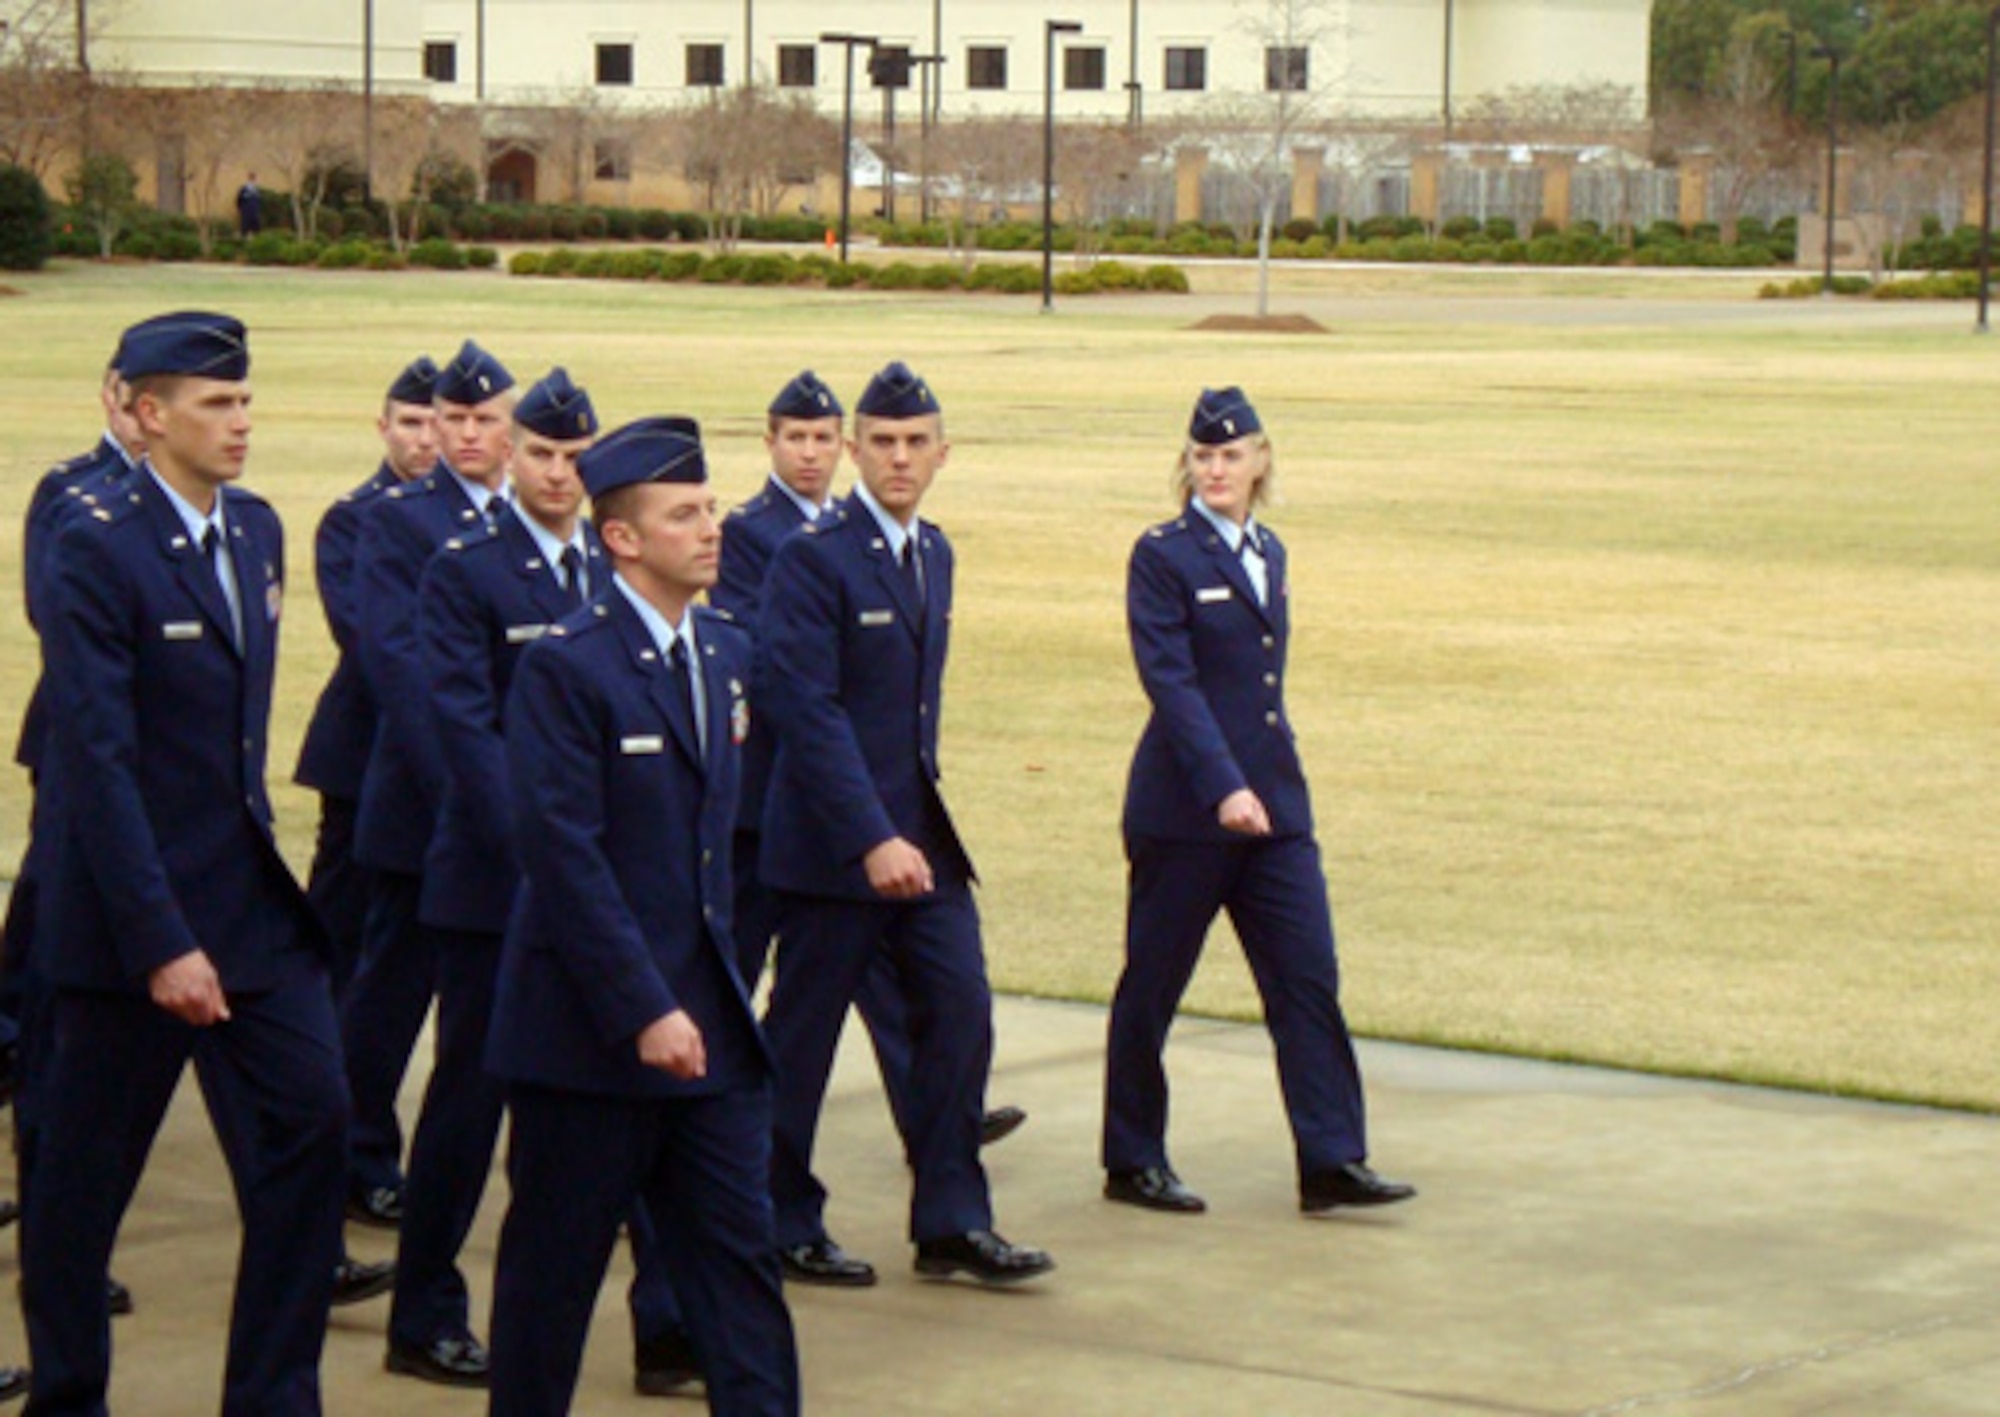 (Far right) Second Lieutenant Melanie Singer marches in the ceremonial parade during her graduation from Officer Training School at Maxwell Air Force Base, Ala., on Dec. 16. (U.S. Air Force photo/Chief Master Sgt. David Macerelli)